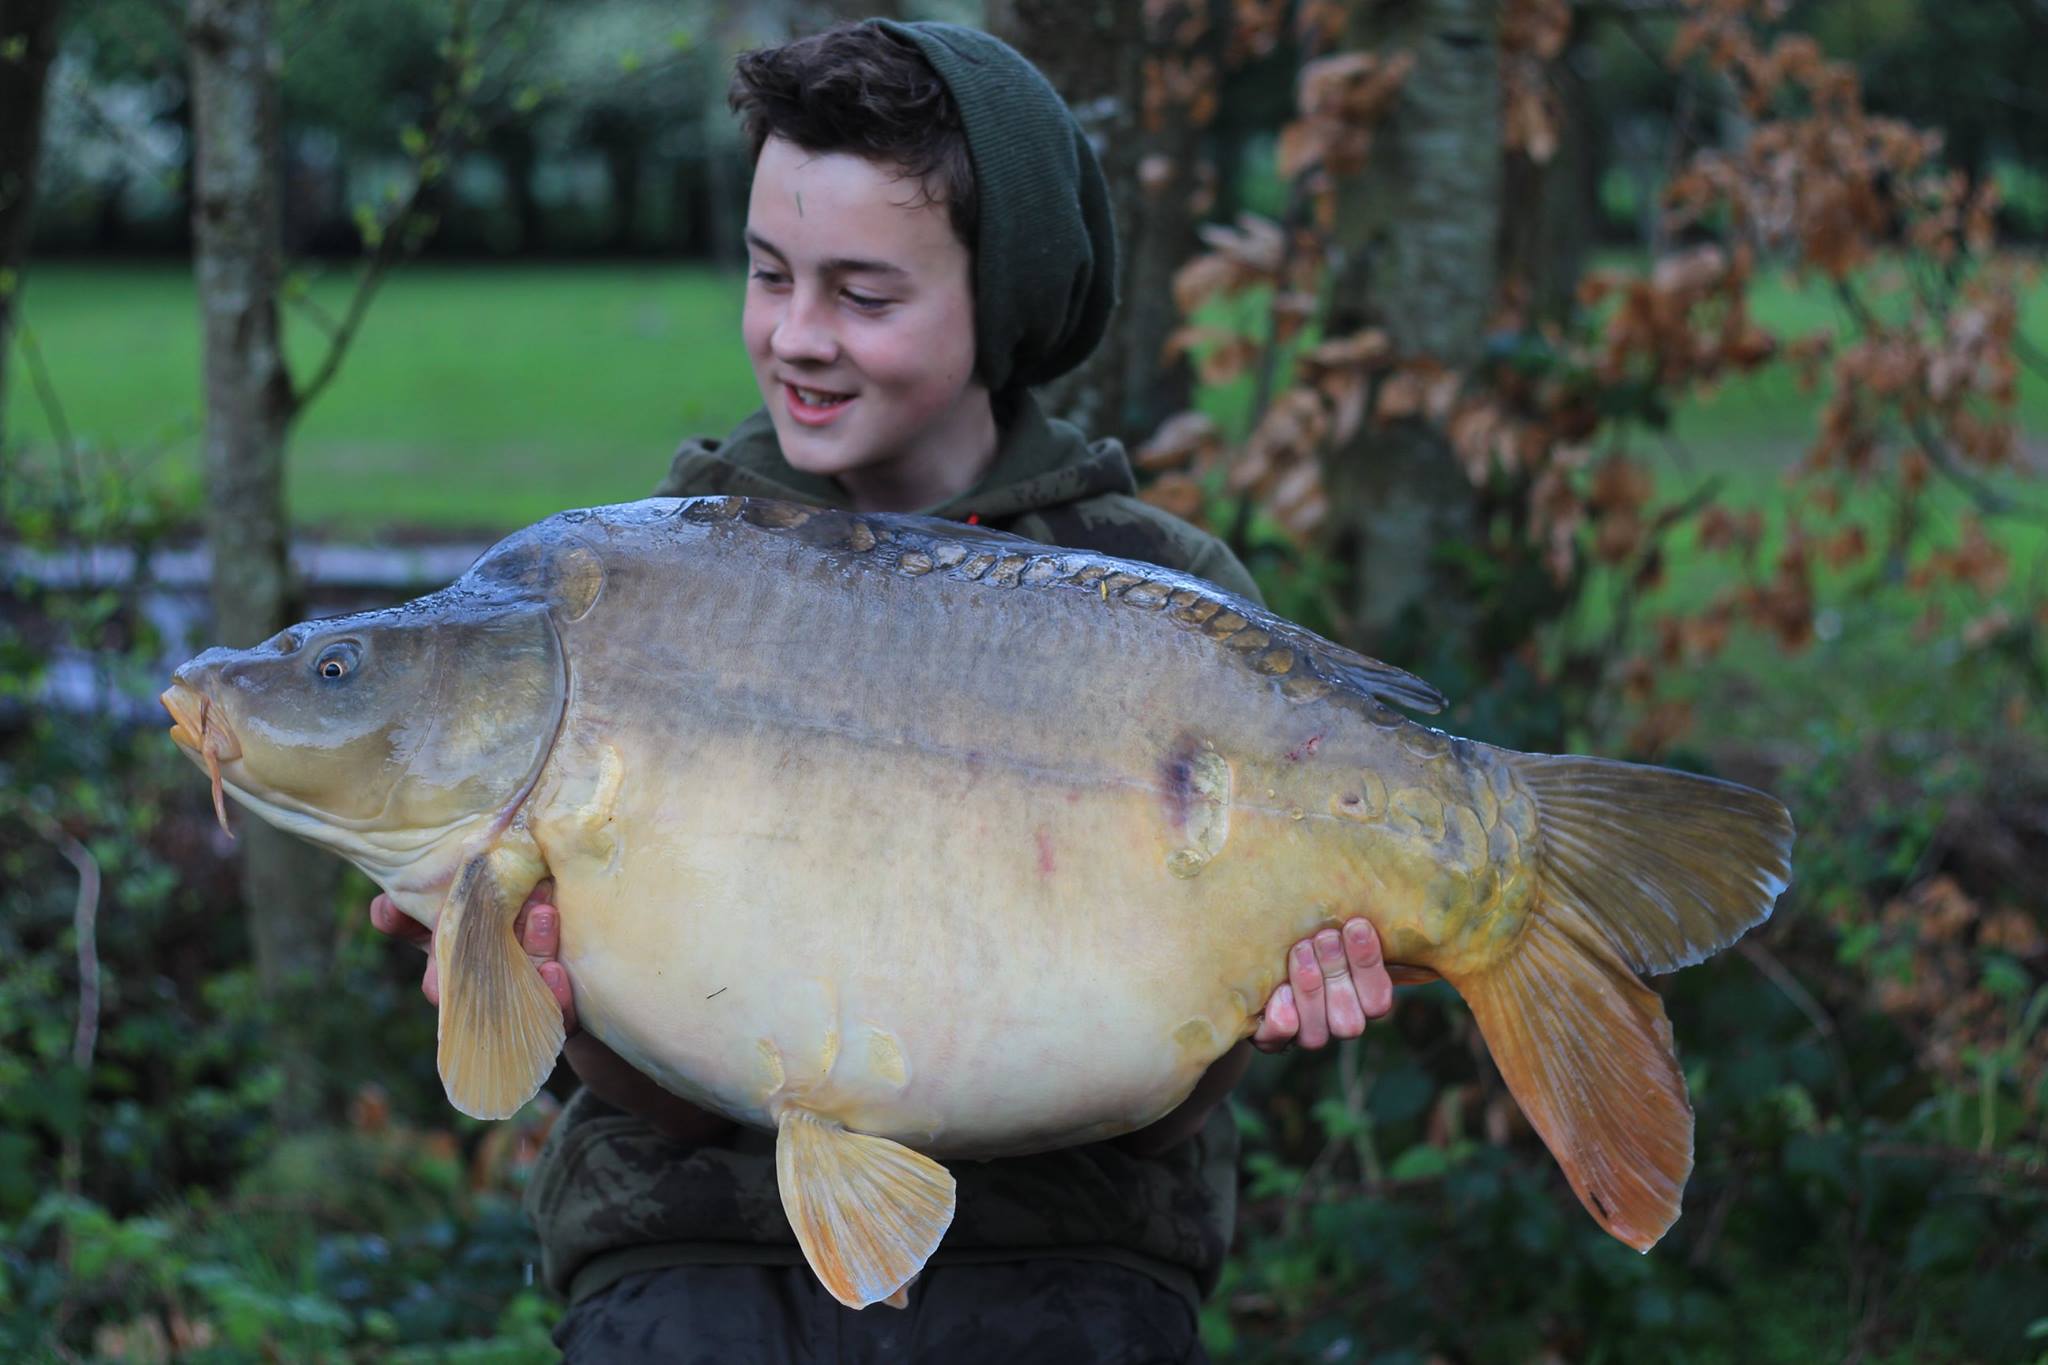 The scales read 39lb 6oz and I was chuffed to say the least.